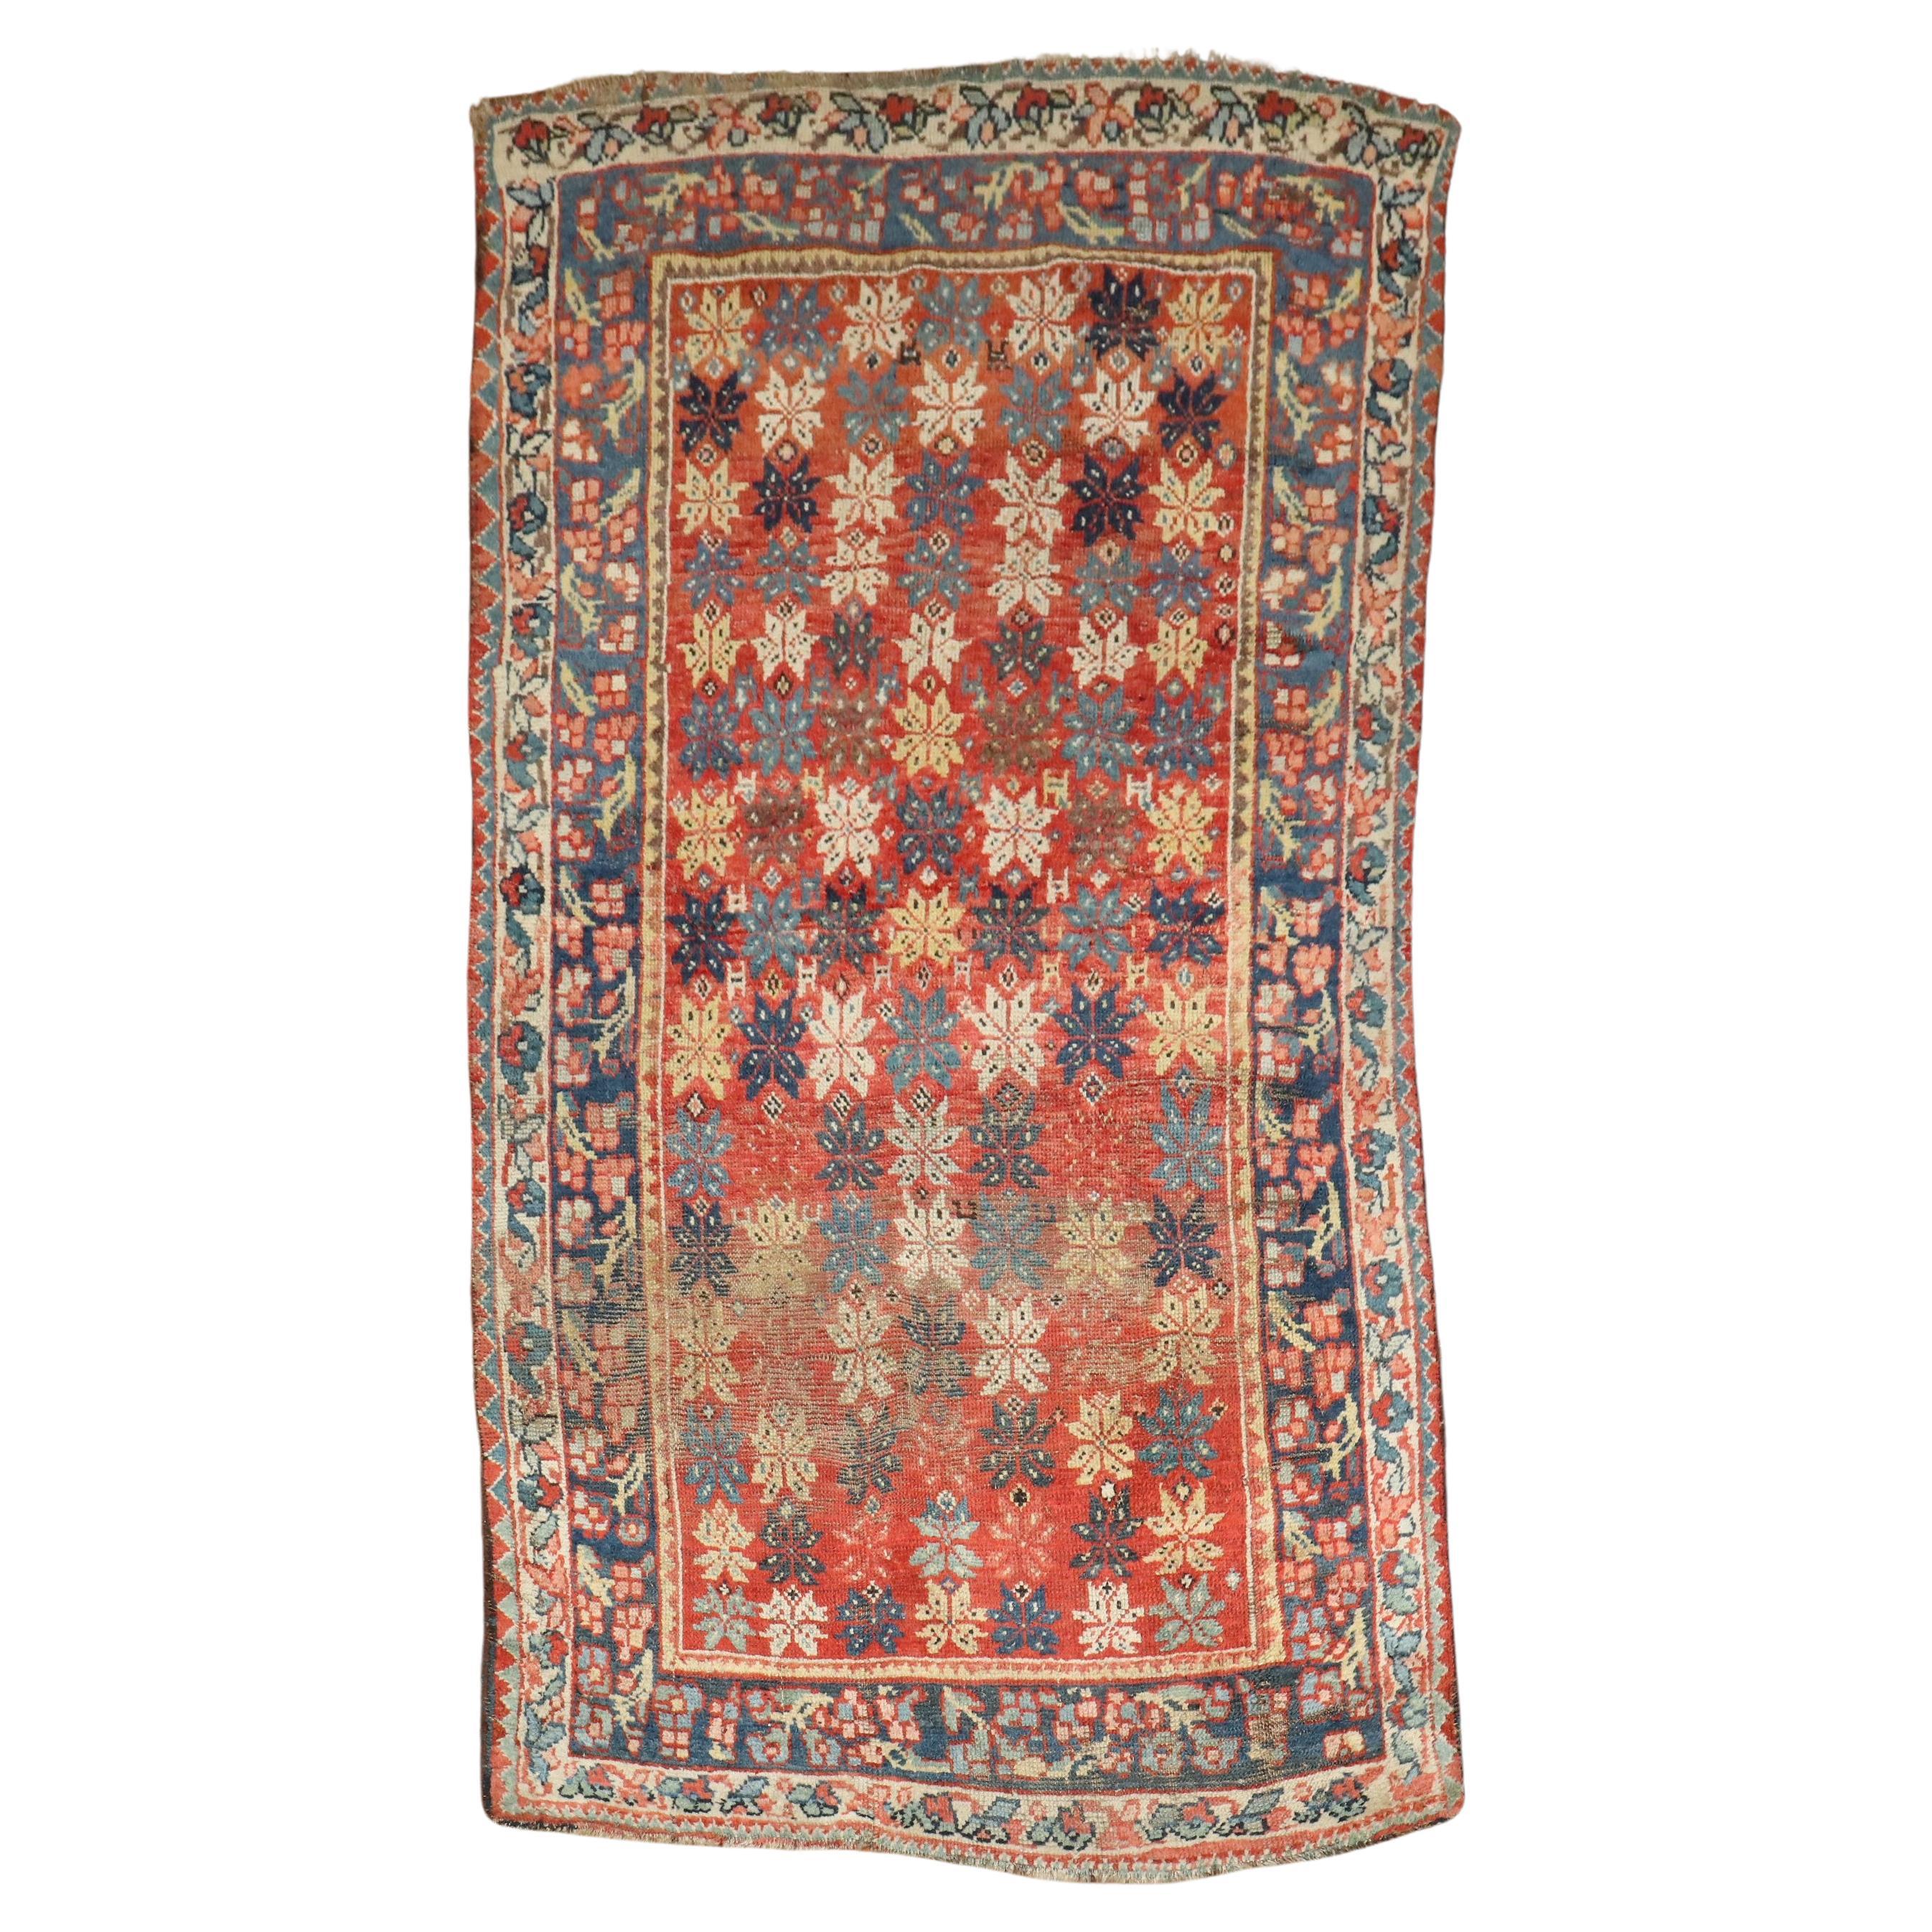 Zabihi Collection Antique Persian Mahal Scatter Rug